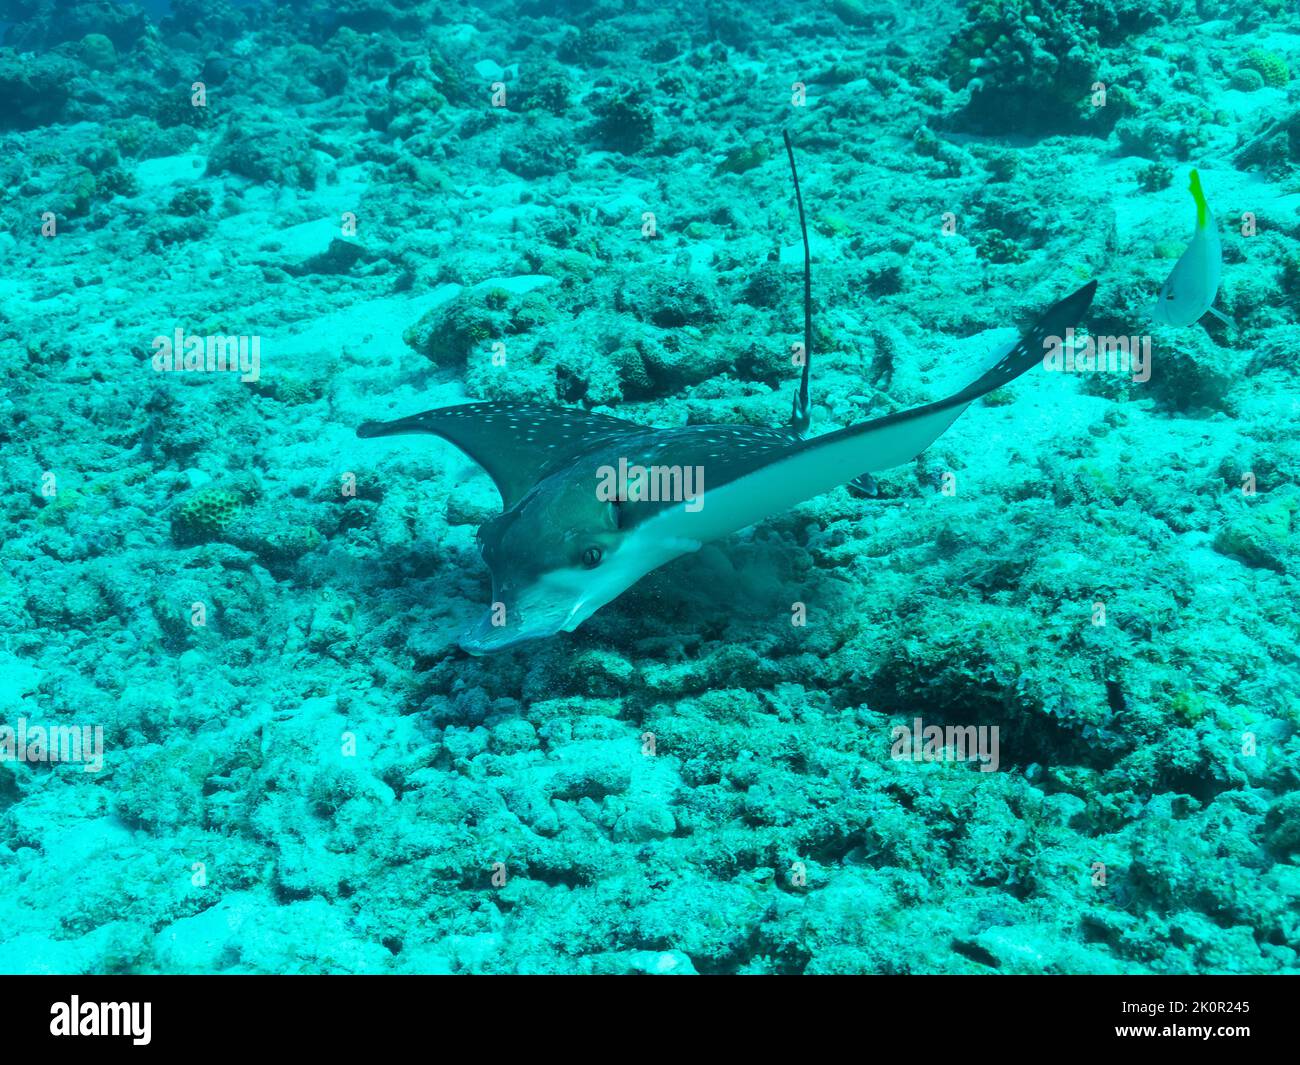 Whitespotted eagle ray in the depths of the Indian ocean, Maldive islands Stock Photo